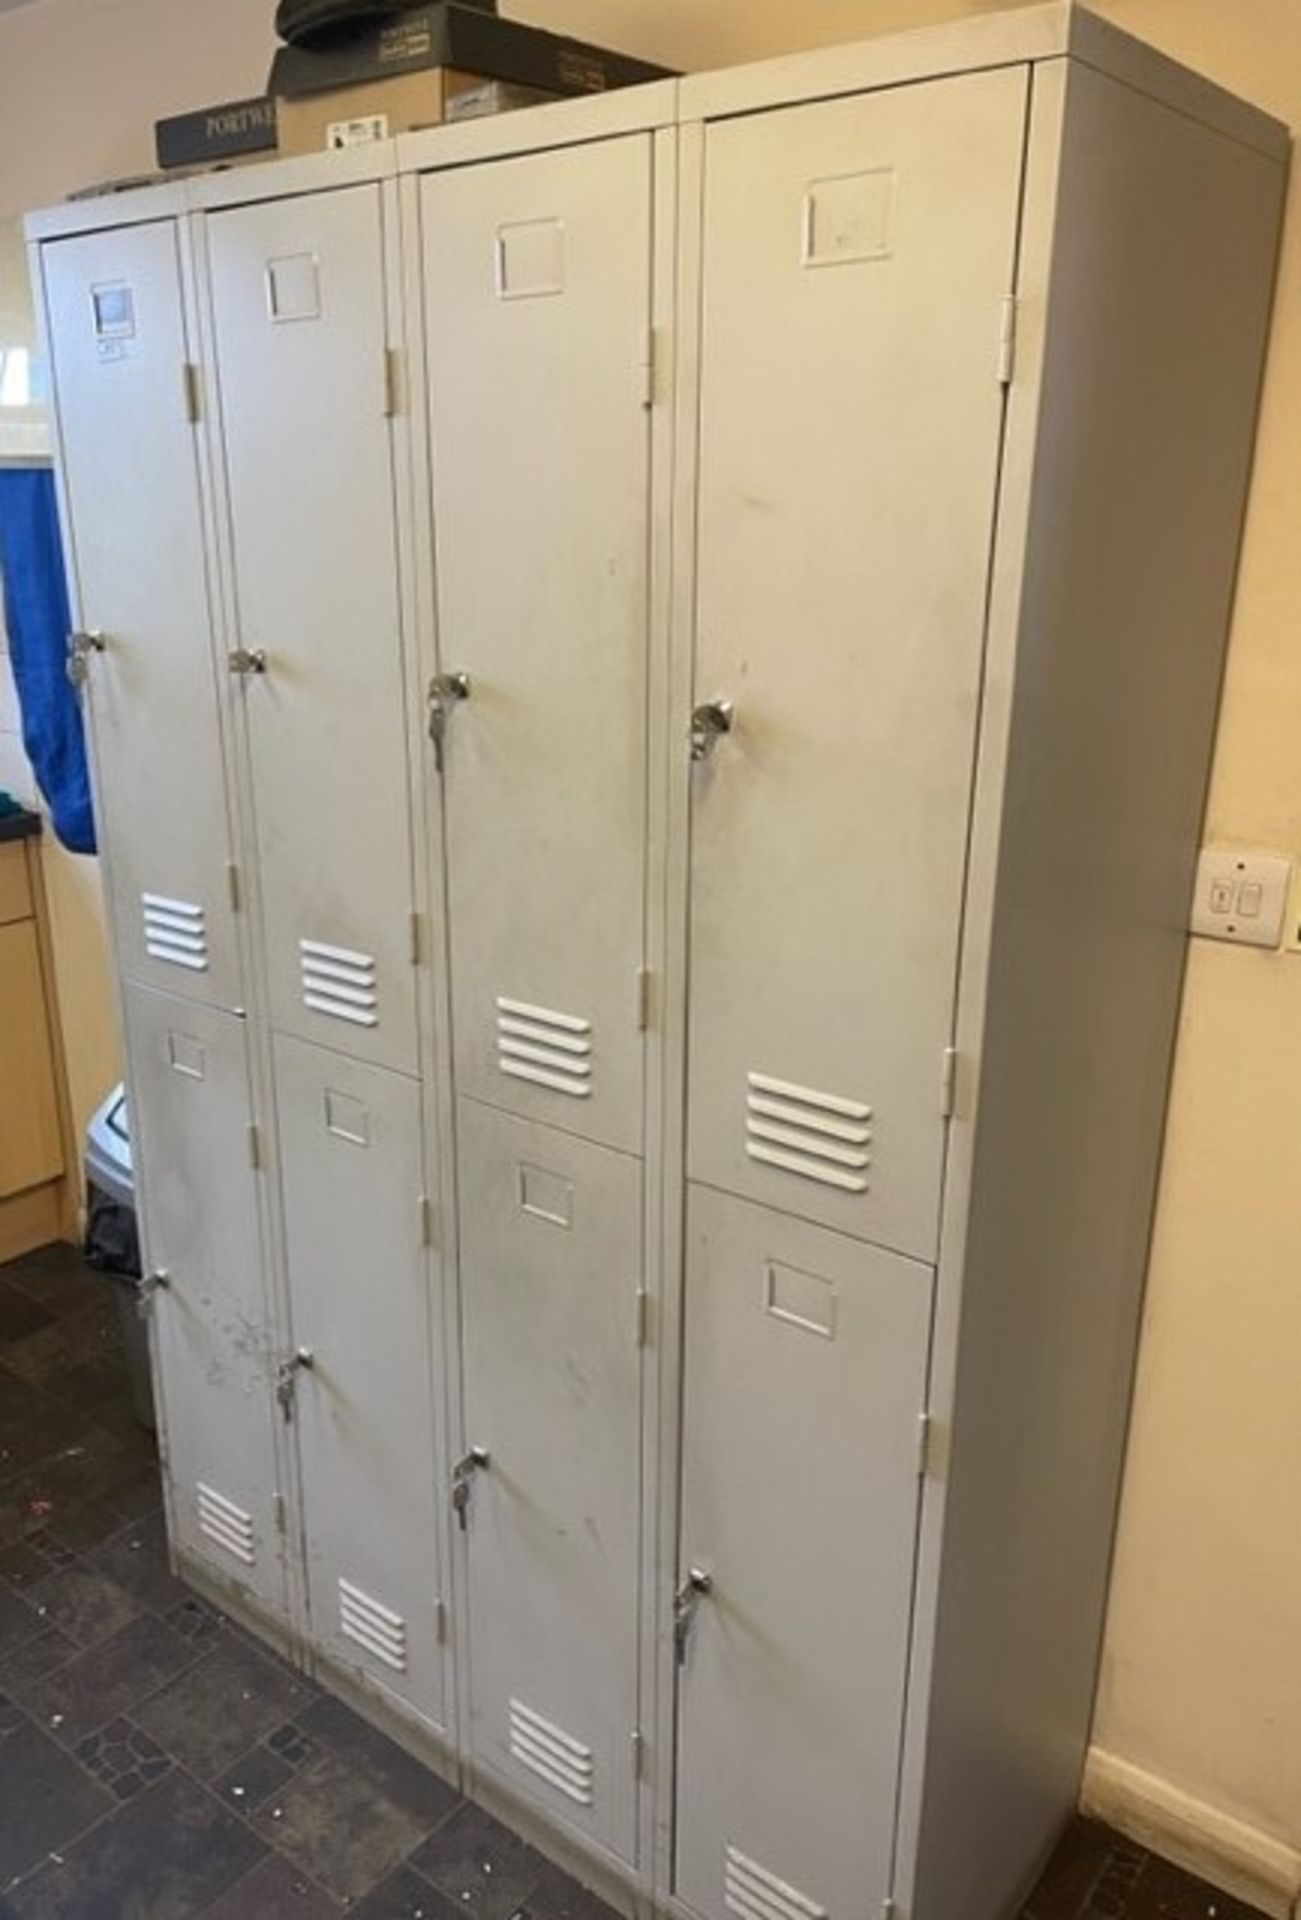 8 Grey Steel Personnel Lockers with Keys (Location Colchester. Please Refer to General Notes)